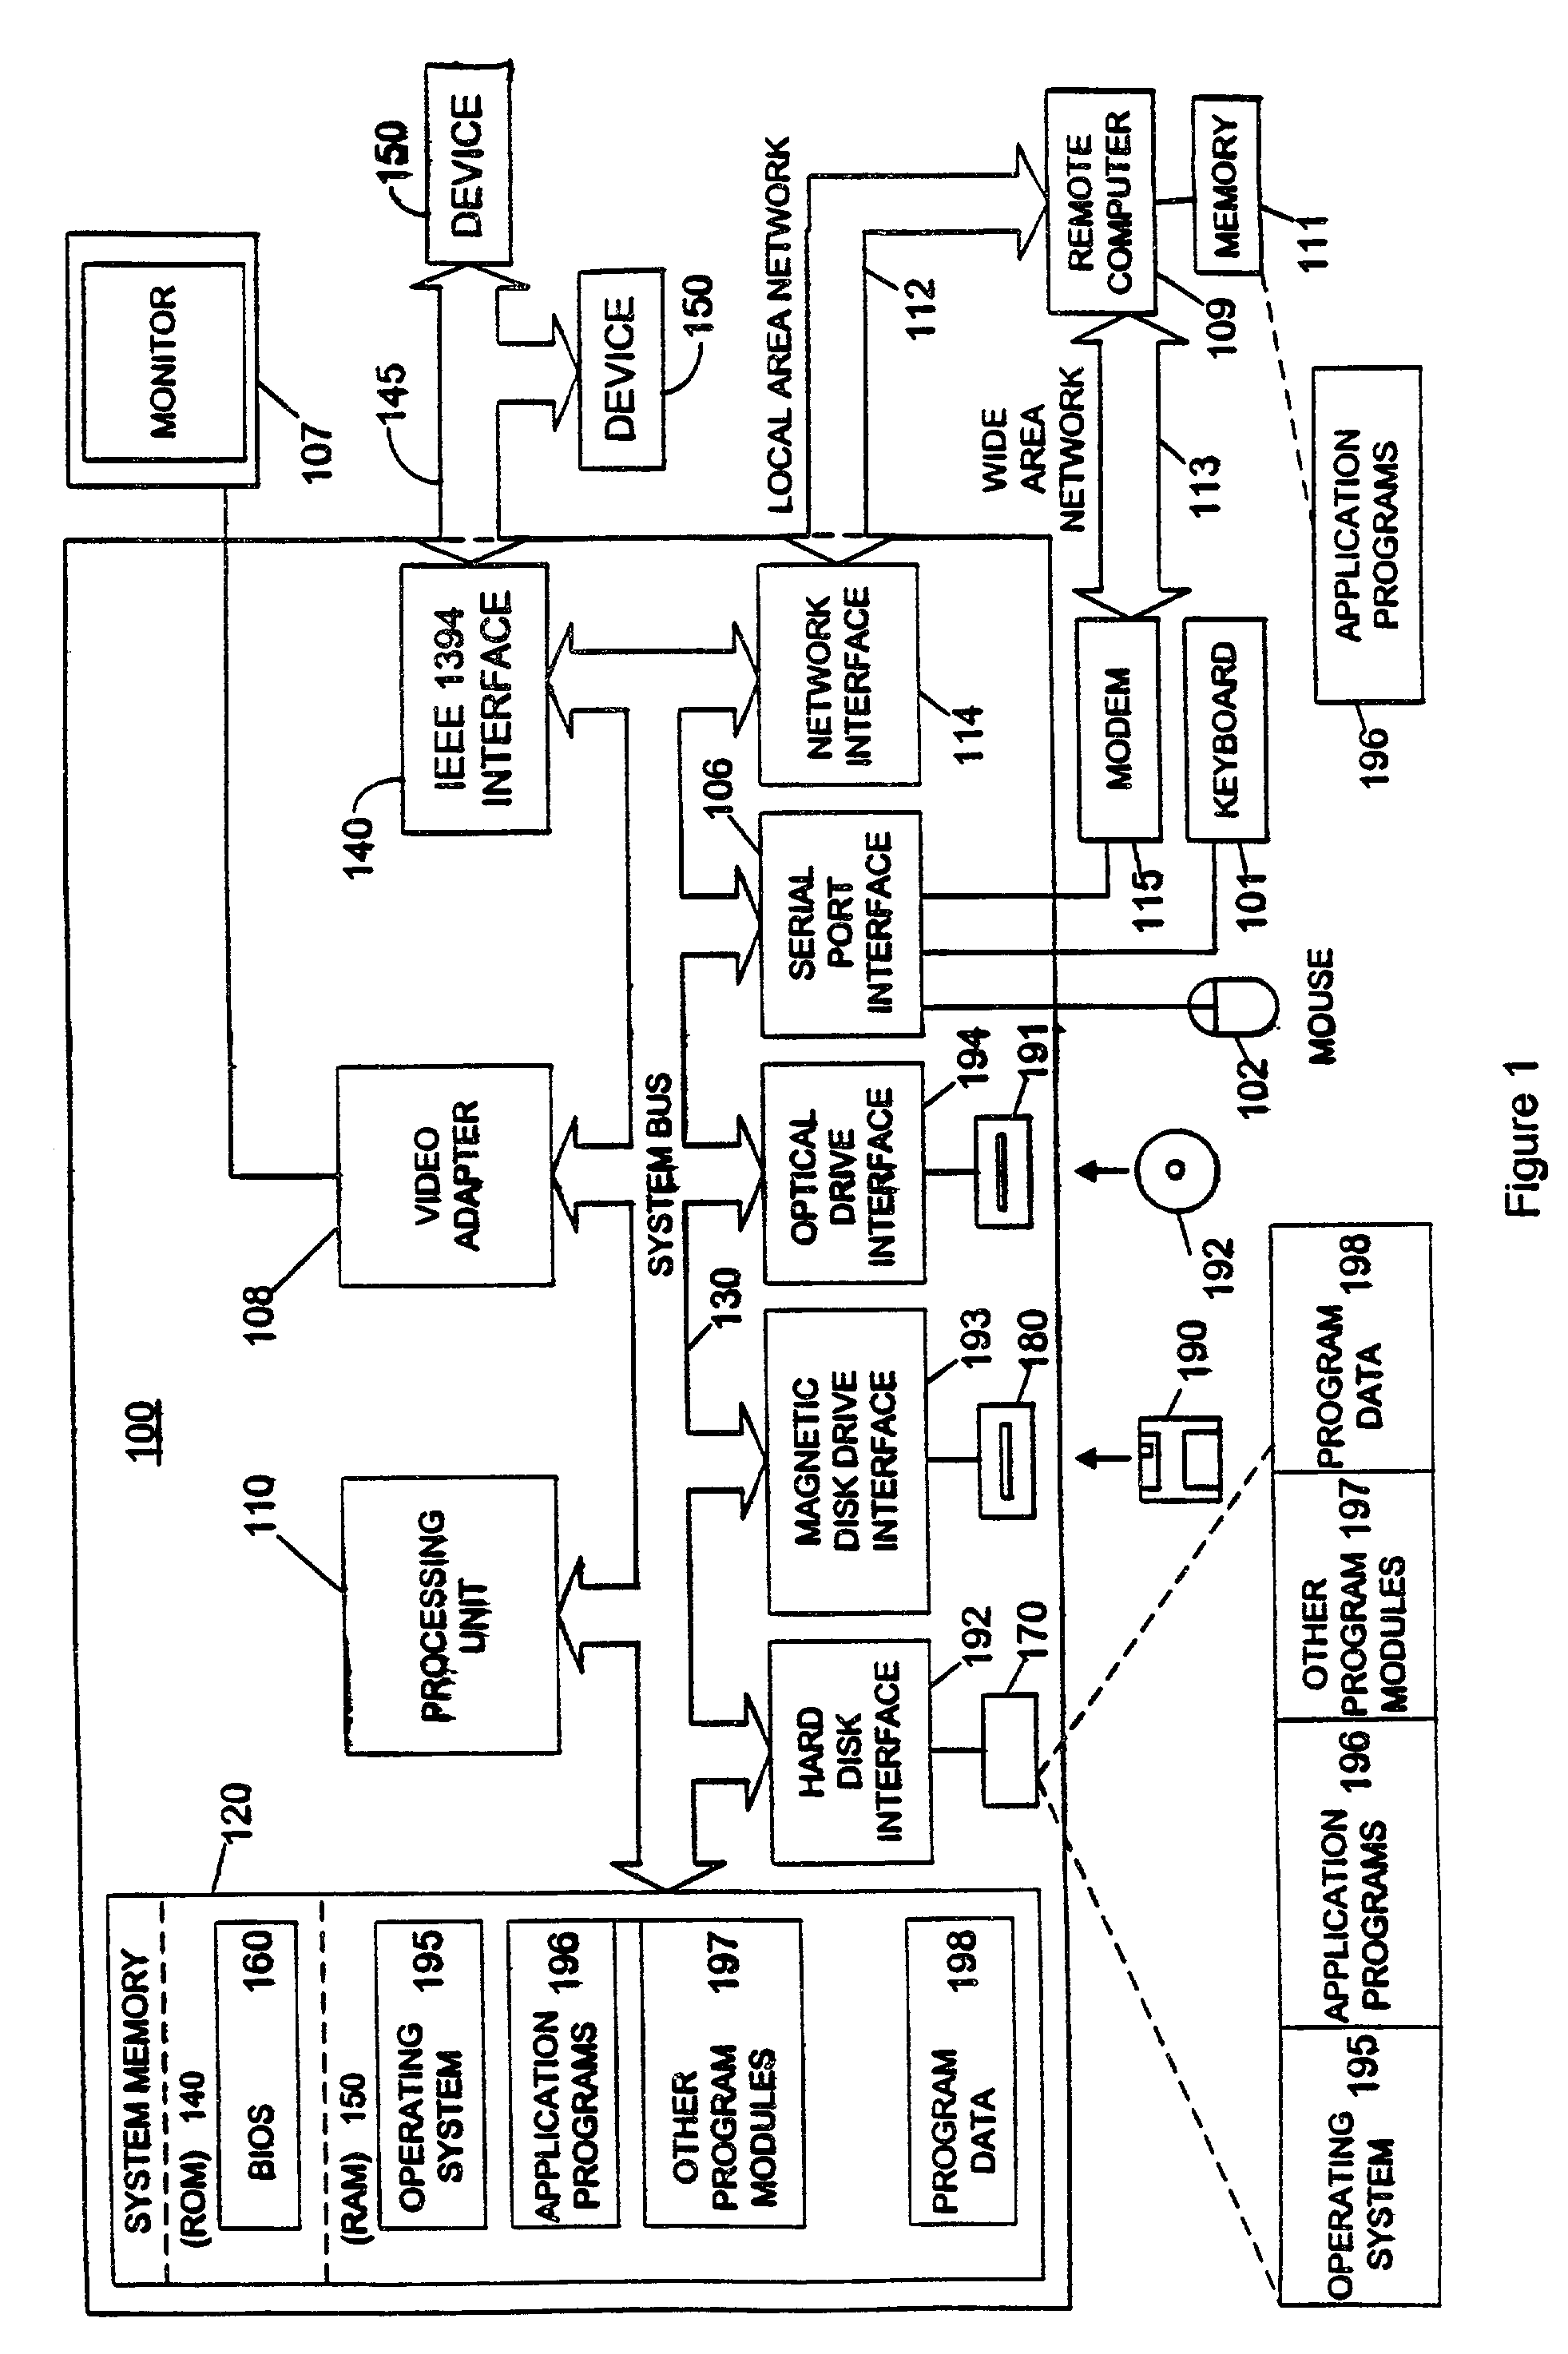 Page granular curtained memory via mapping control